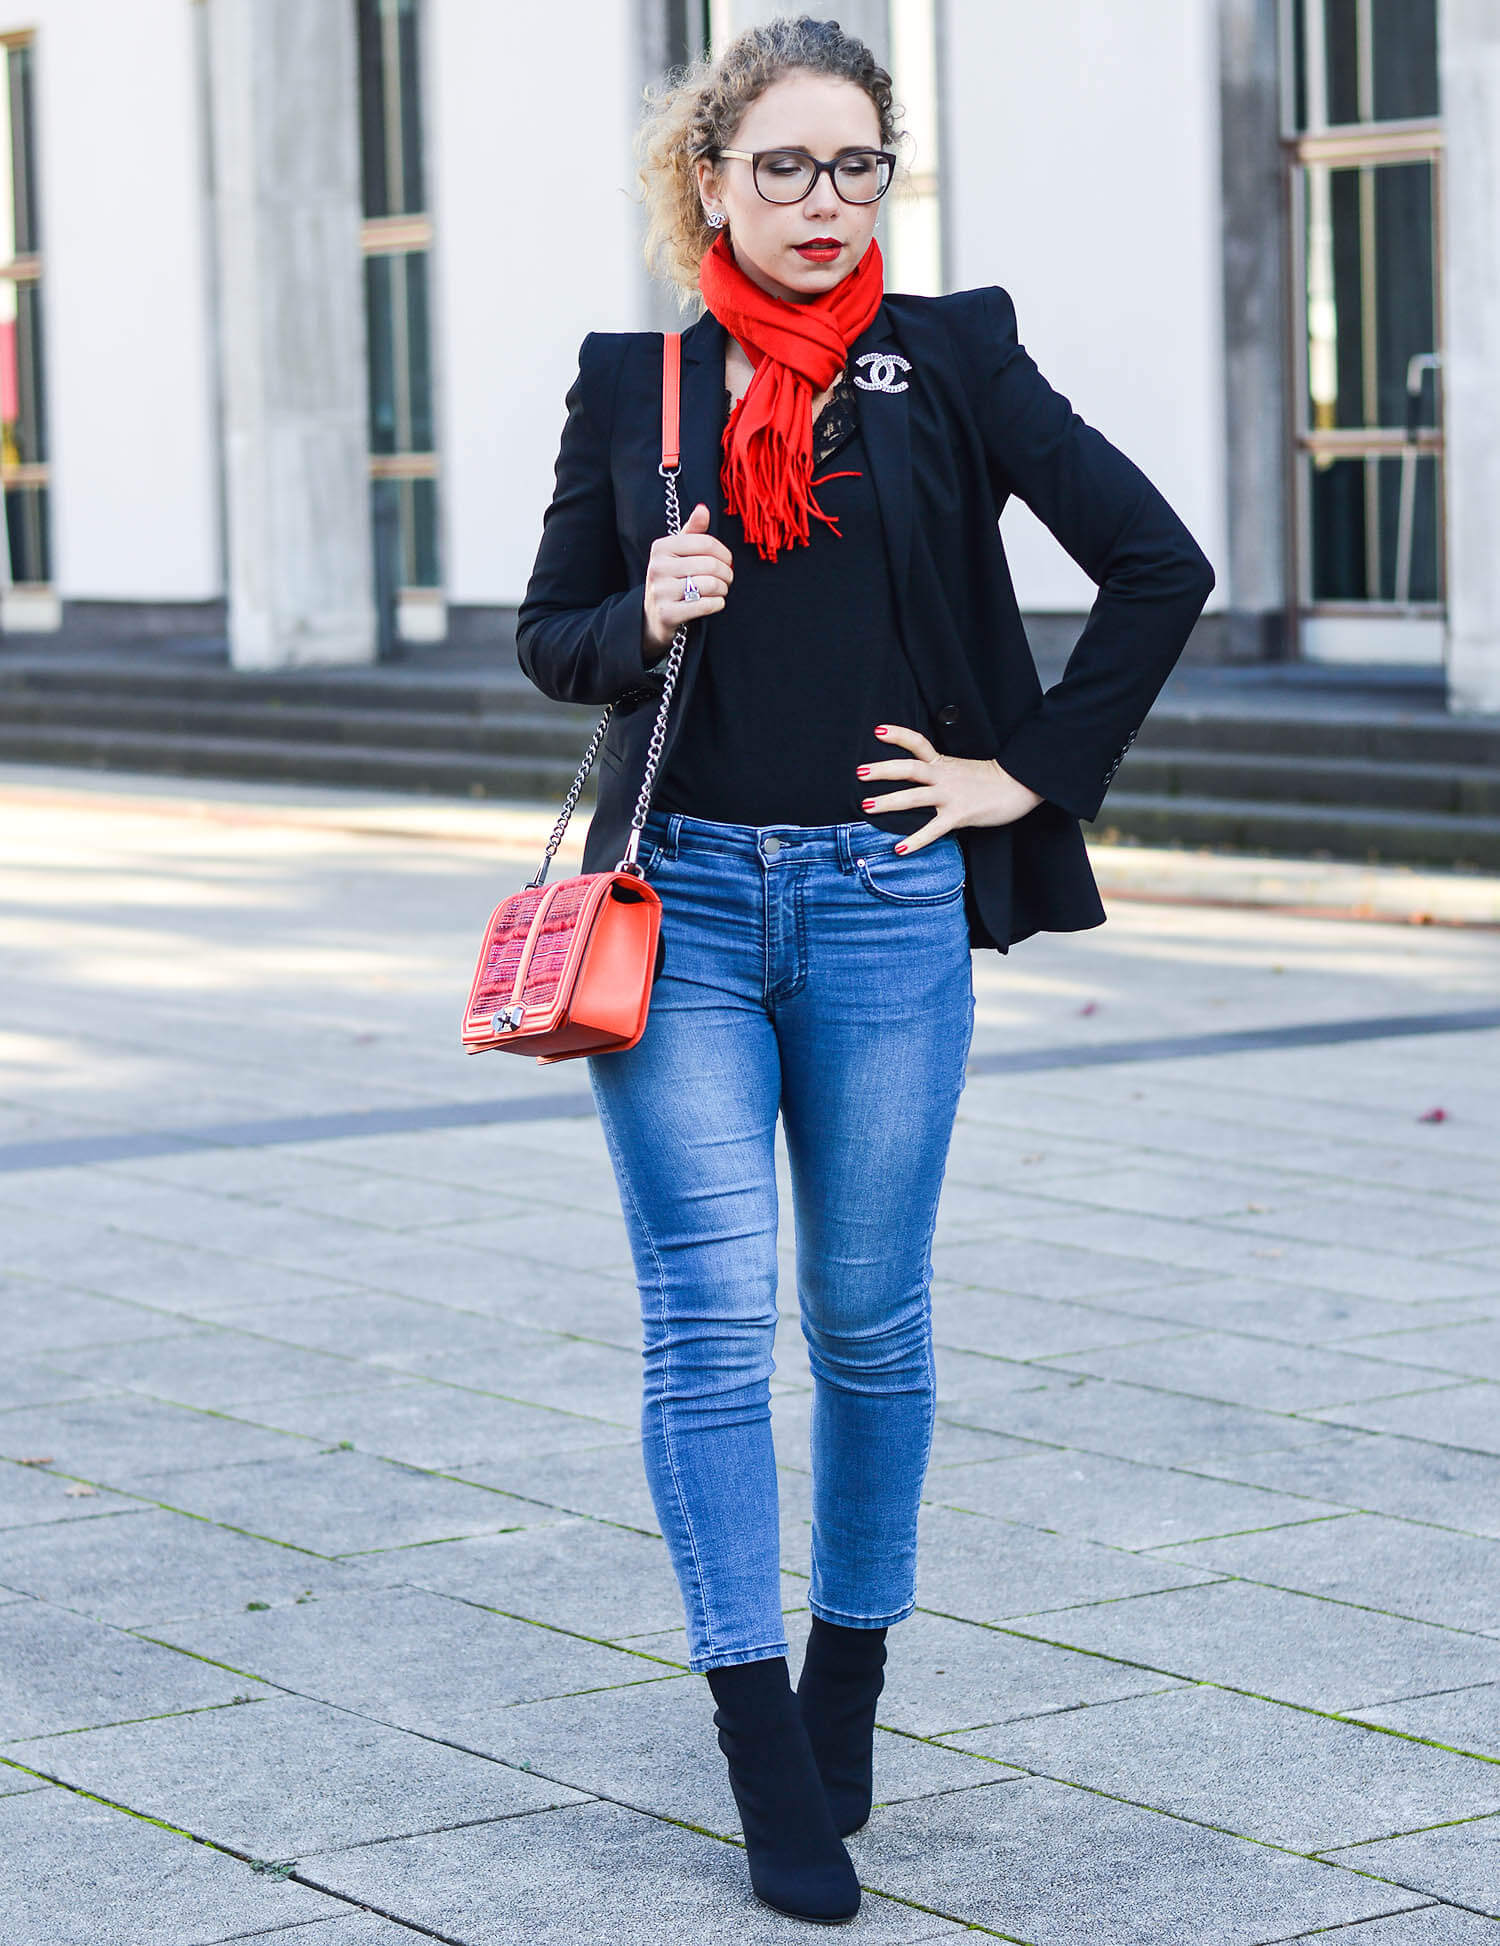 Kationette-fashionblogger-nrw-Outfit-Casual-Business-Style-with-Black-Blazer-Denim-Pants-Sock-Boots-and-Red-Accessoires